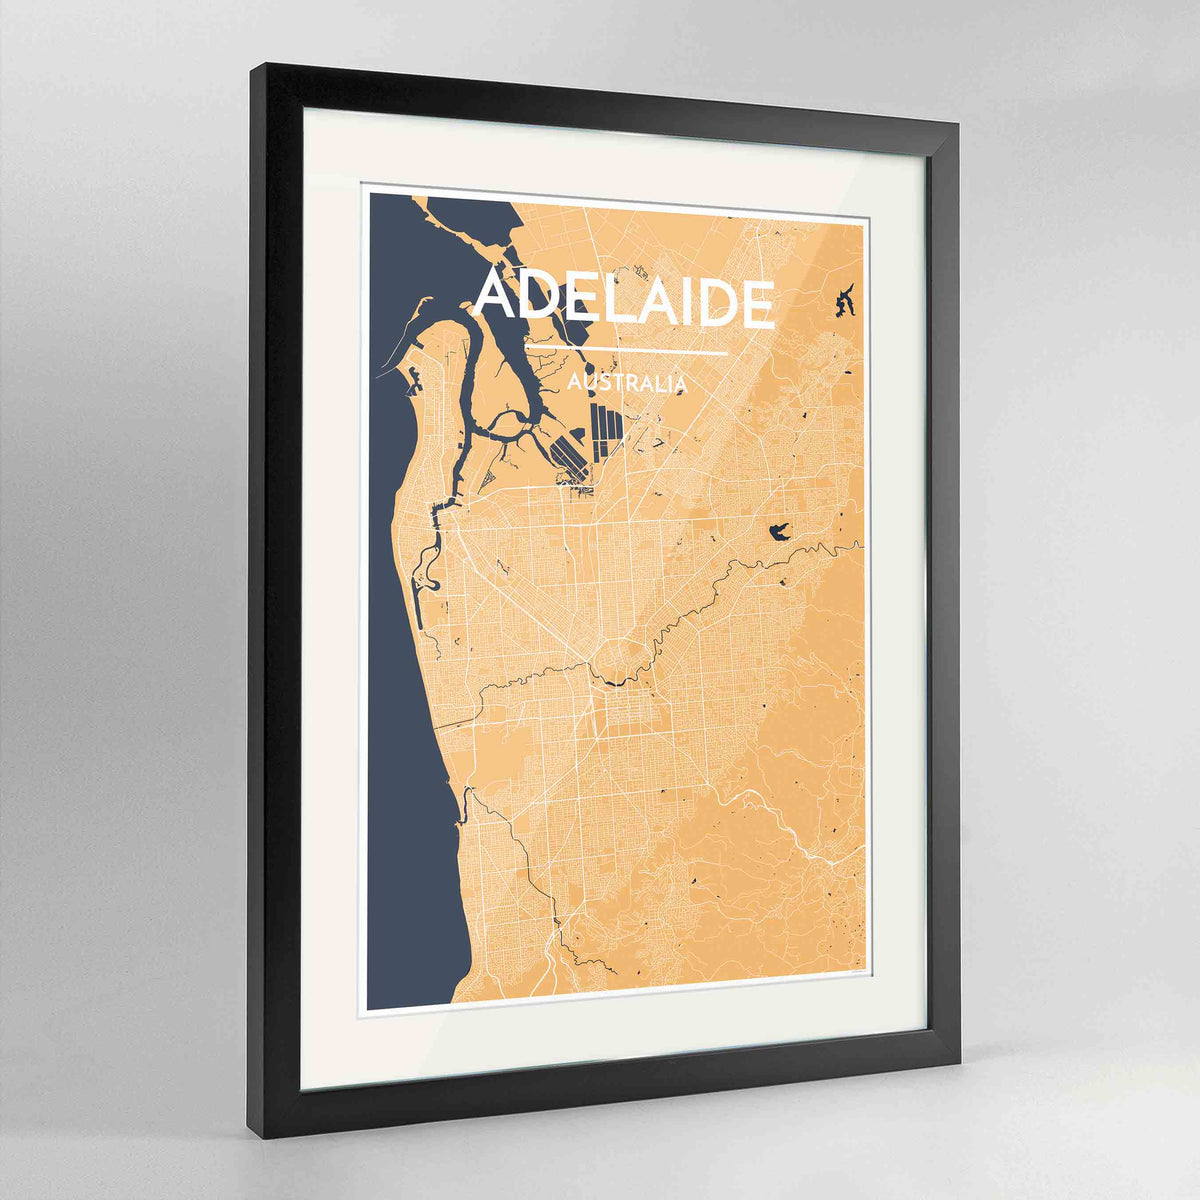 Framed Adelaide Map Art Print 24x36&quot; Contemporary Black frame Point Two Design Group